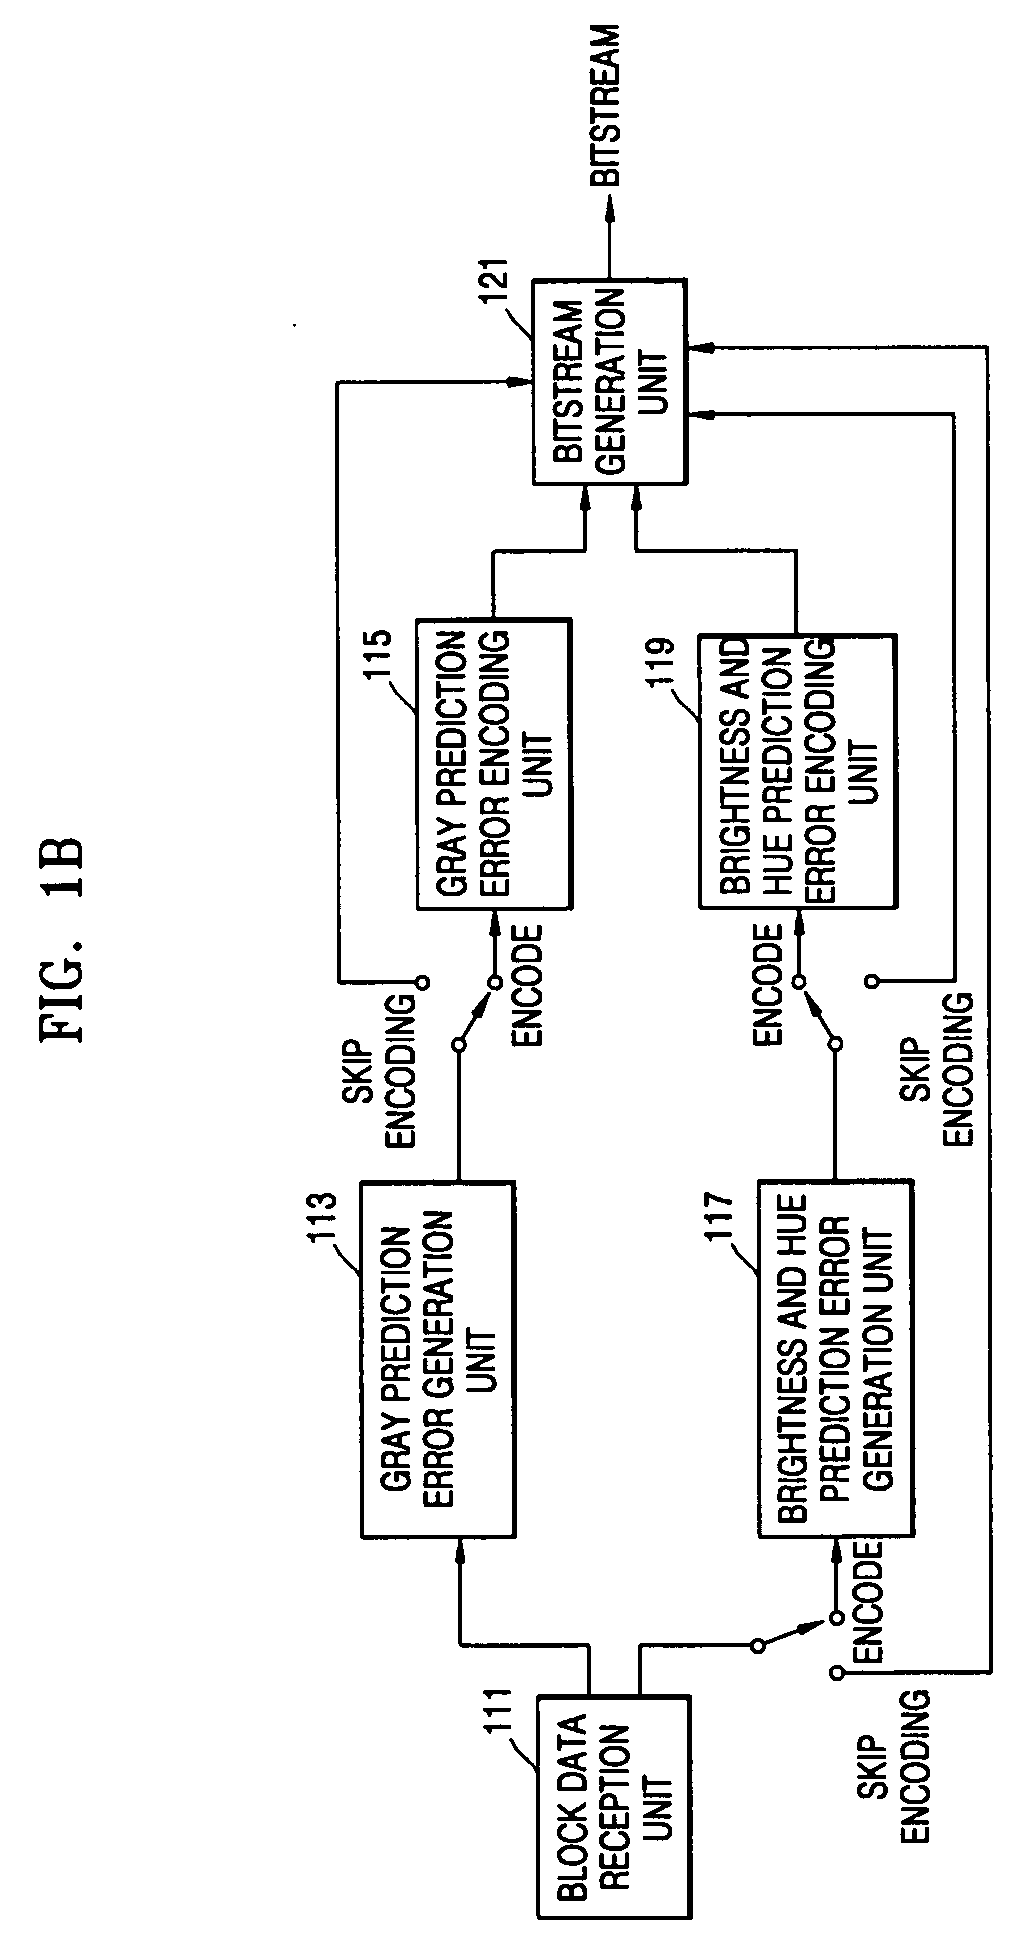 Apparatus and method for encoding and decoding image containing gray alpha channel image